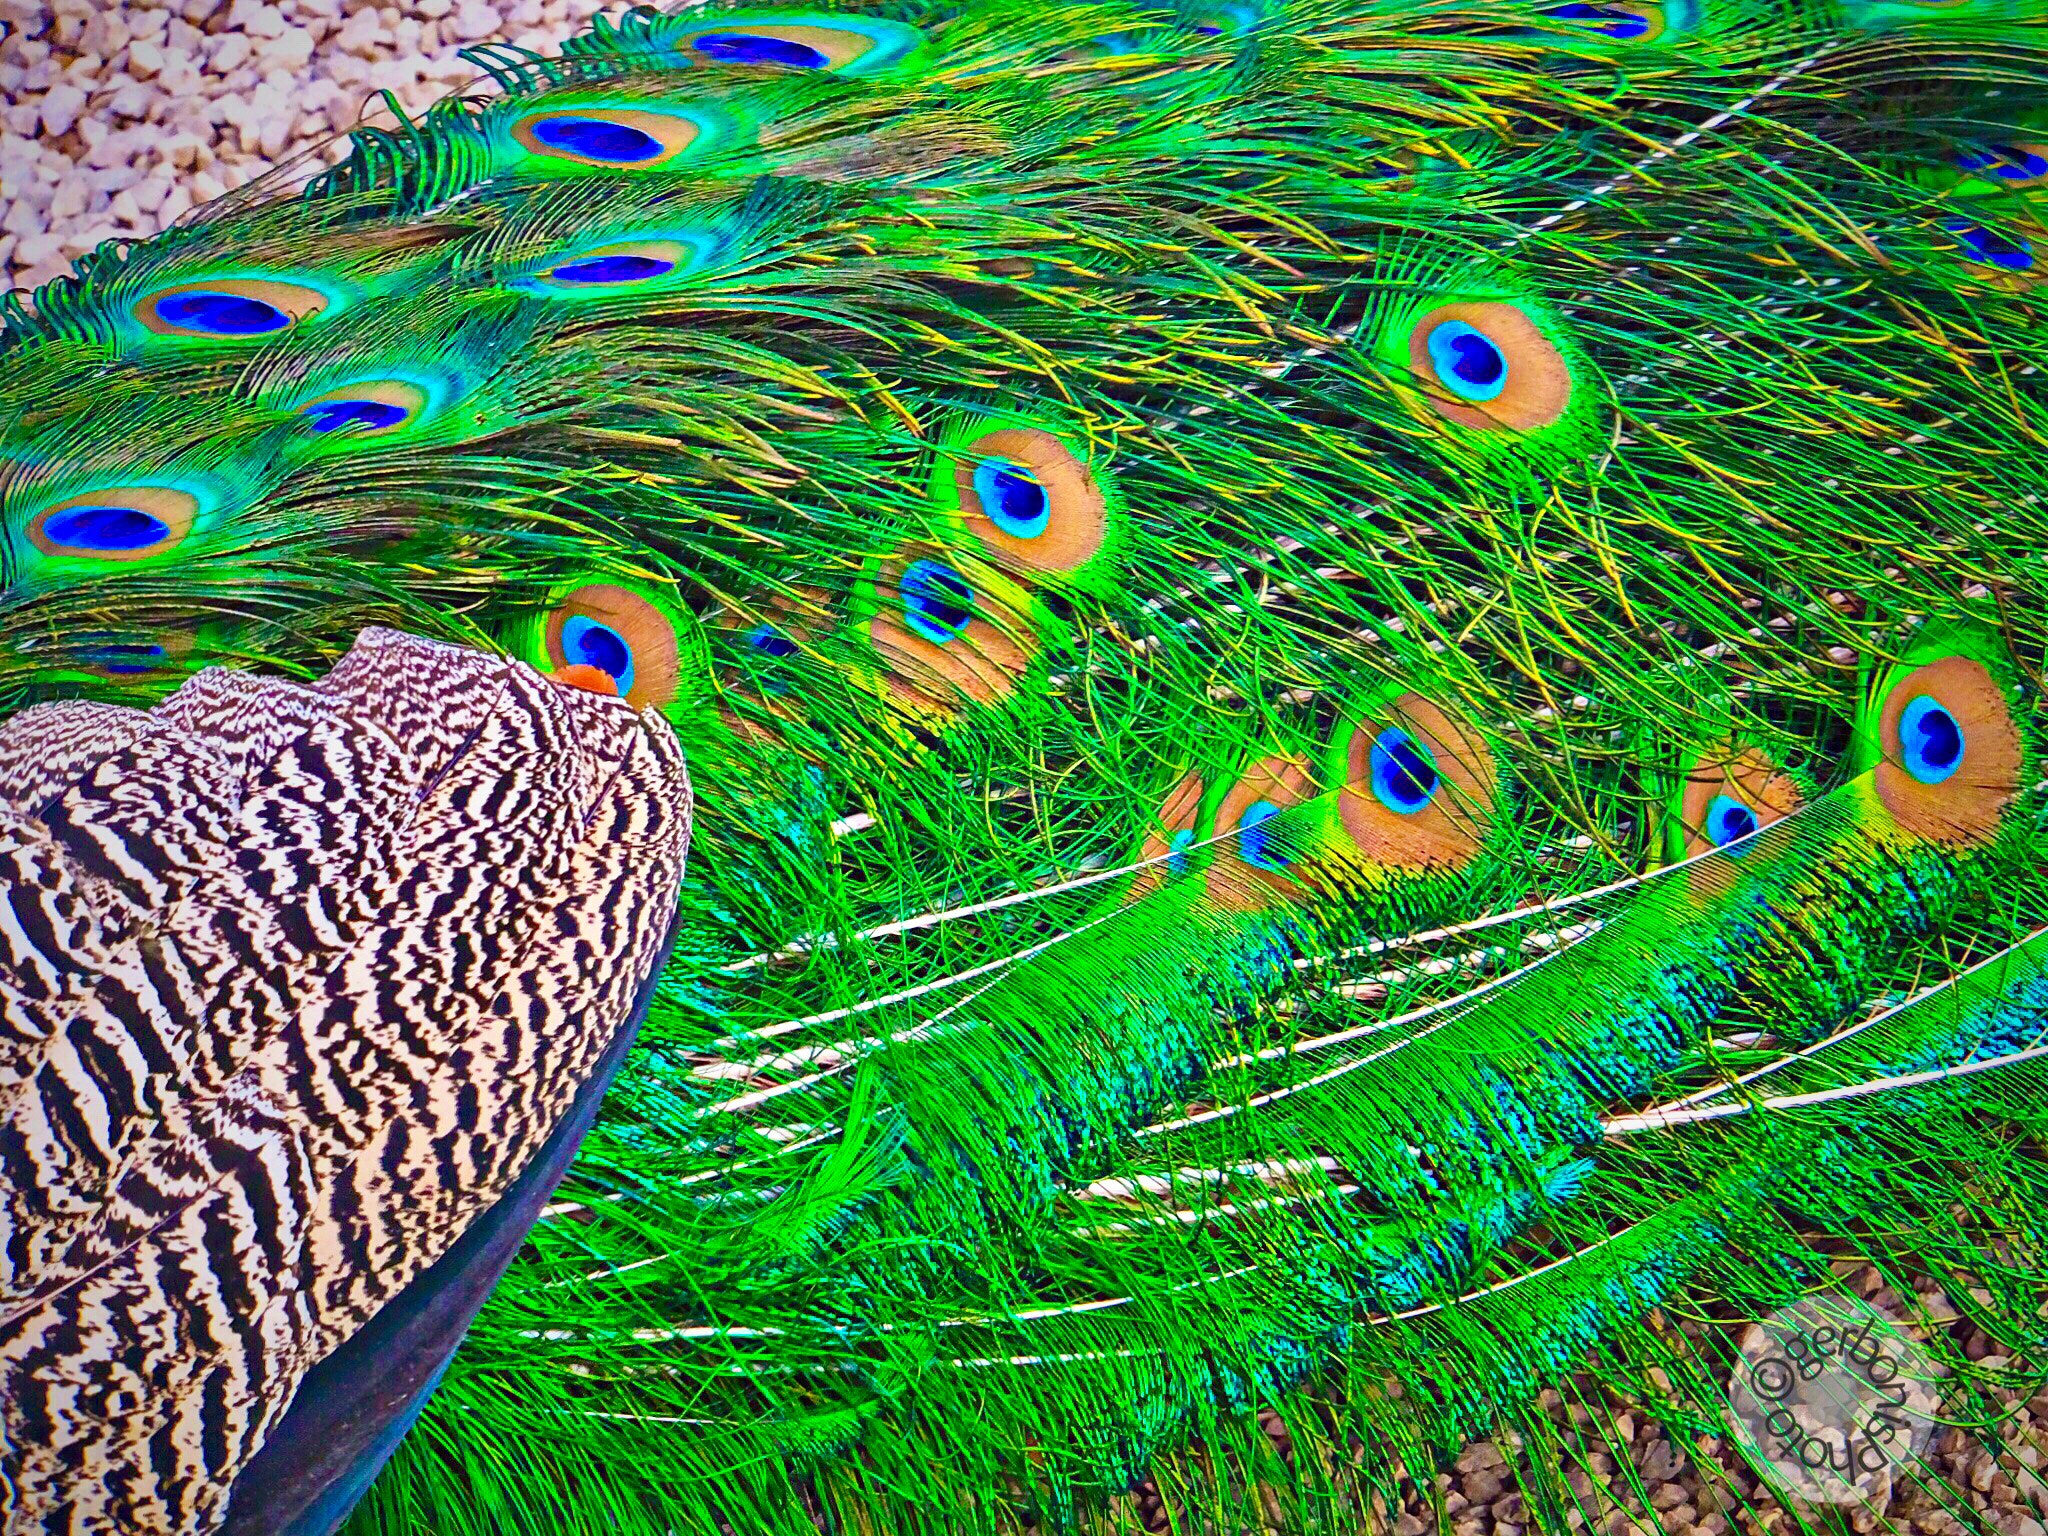 Fujifilm FinePix F900EXR sample photo. The eyes in the peacock's feathers photography